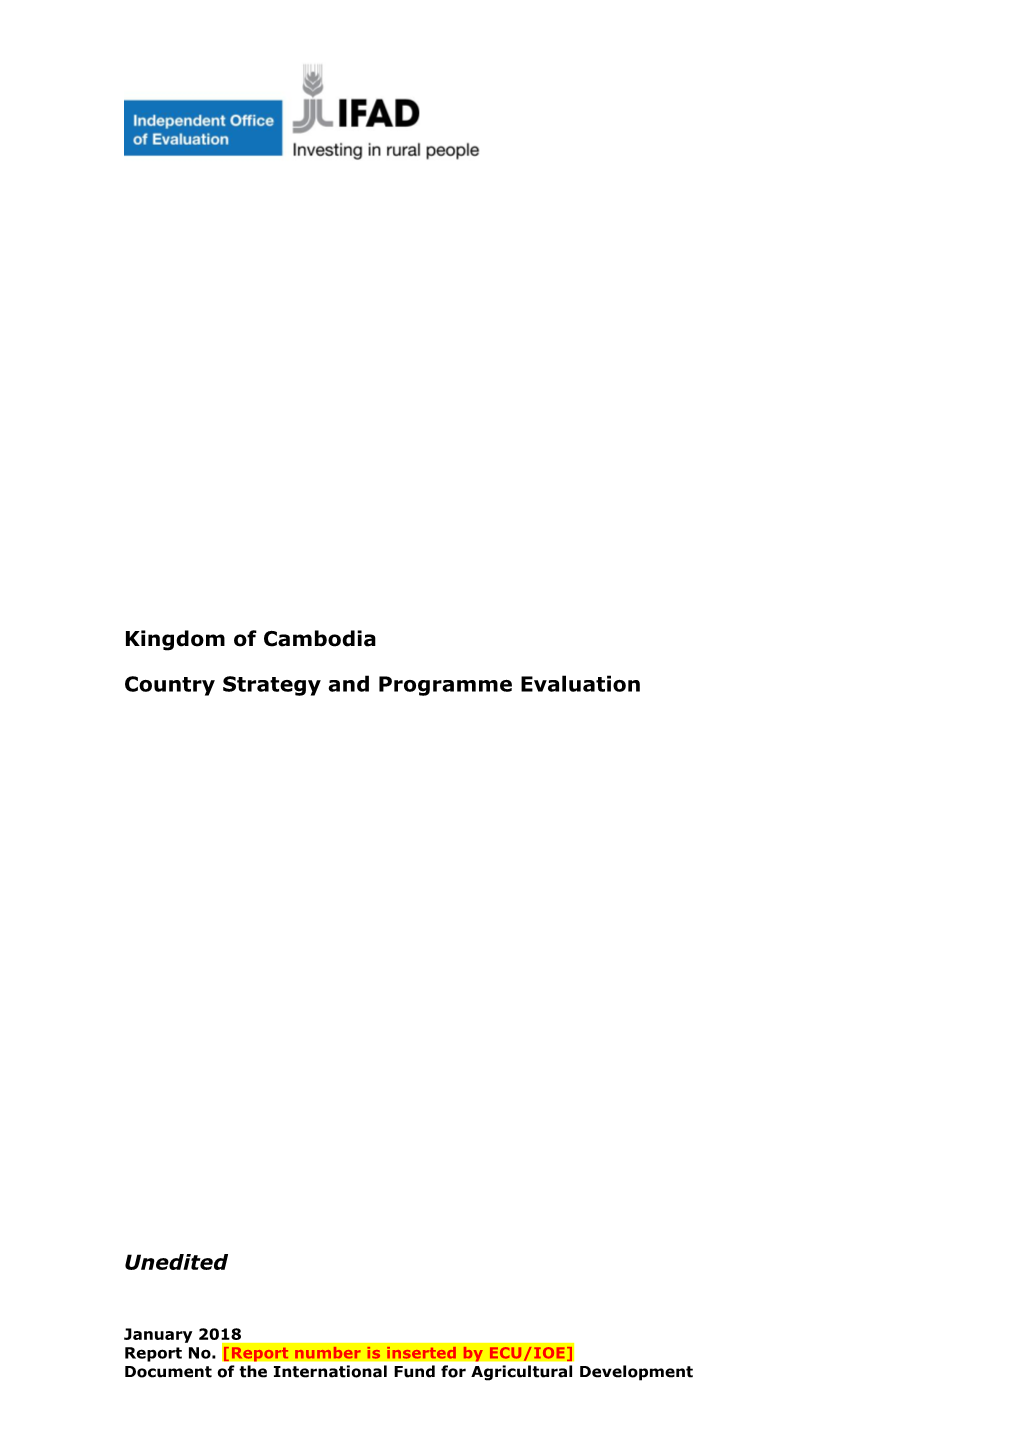 Kingdom of Cambodia Country Strategy and Programme Evaluation